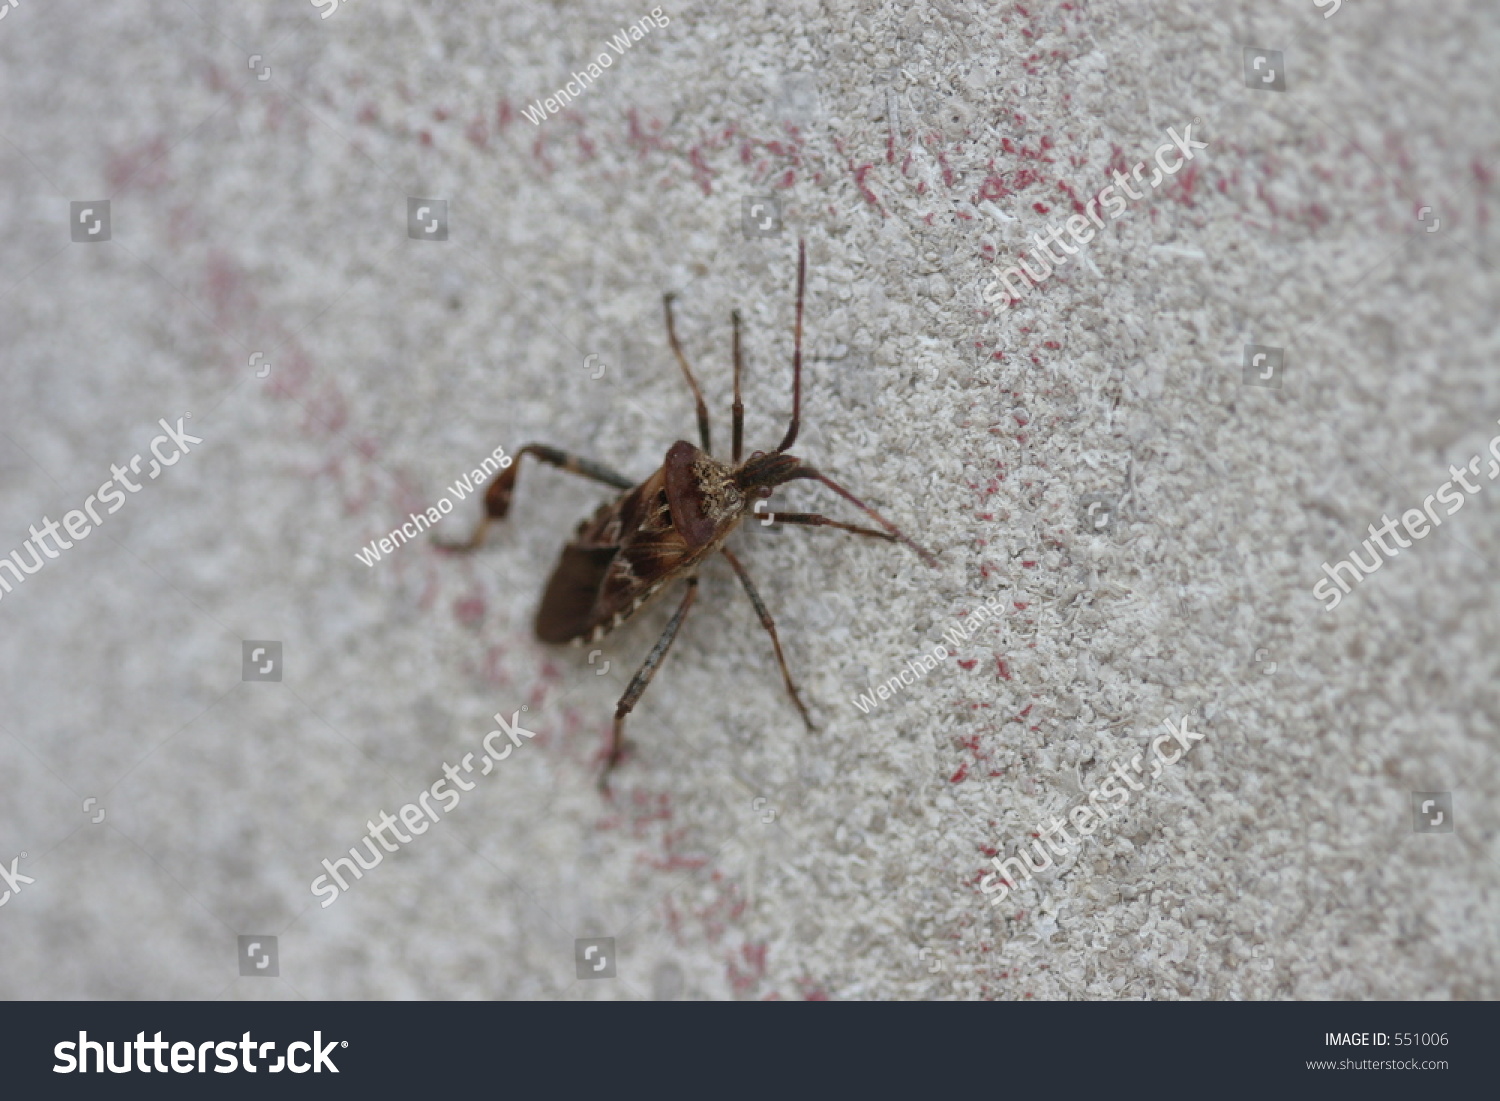 Brown Bug On Wall Stock Photo 551006 - Shutterstock